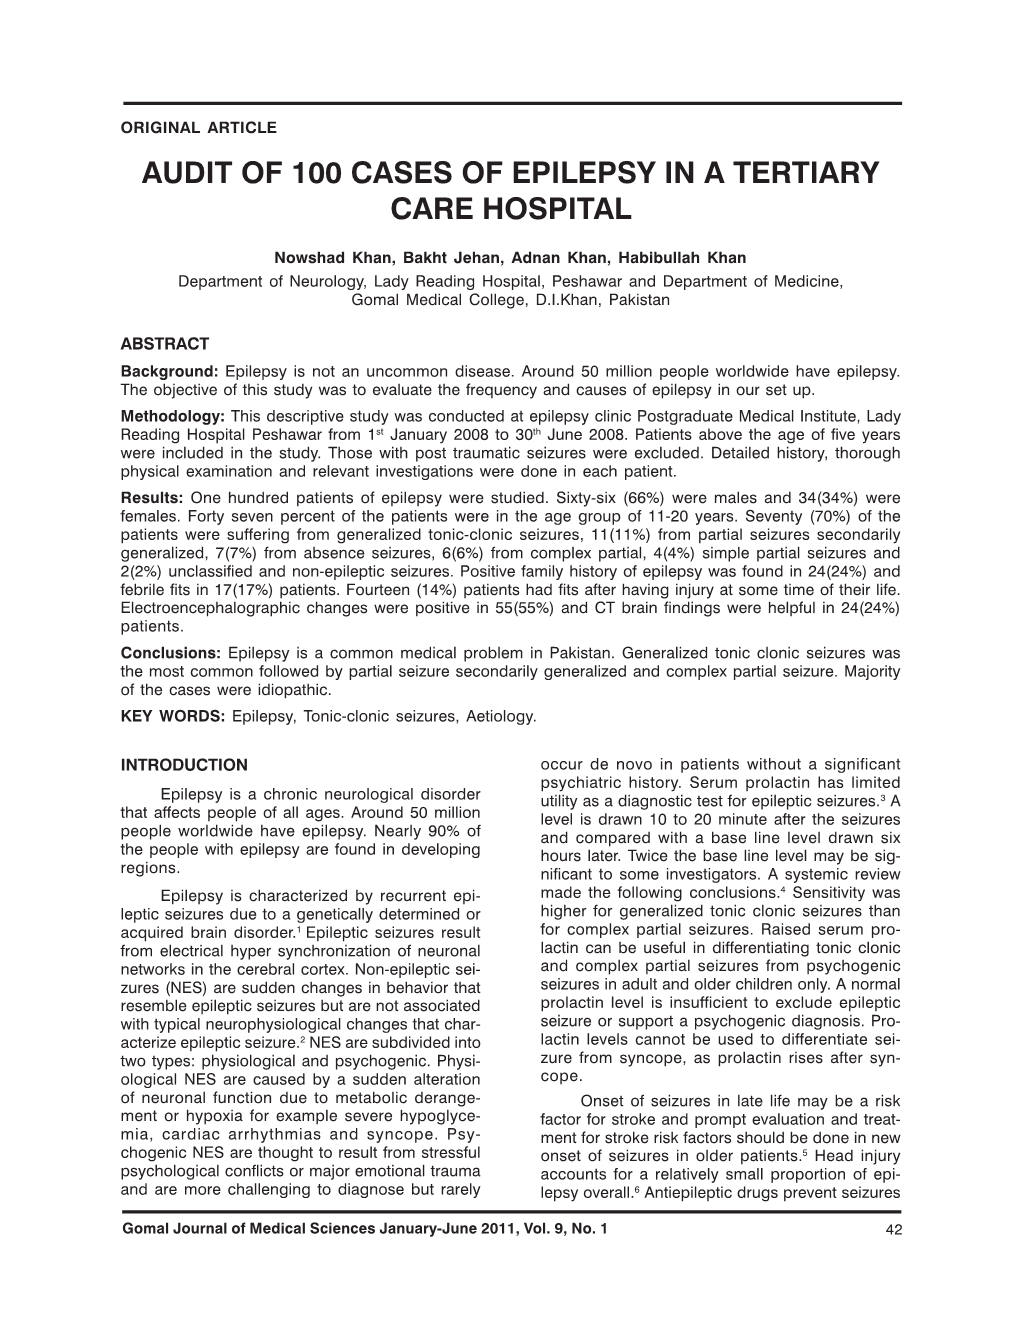 Audit of 100 Cases of Epilepsy in a Tertiary Care Hospital